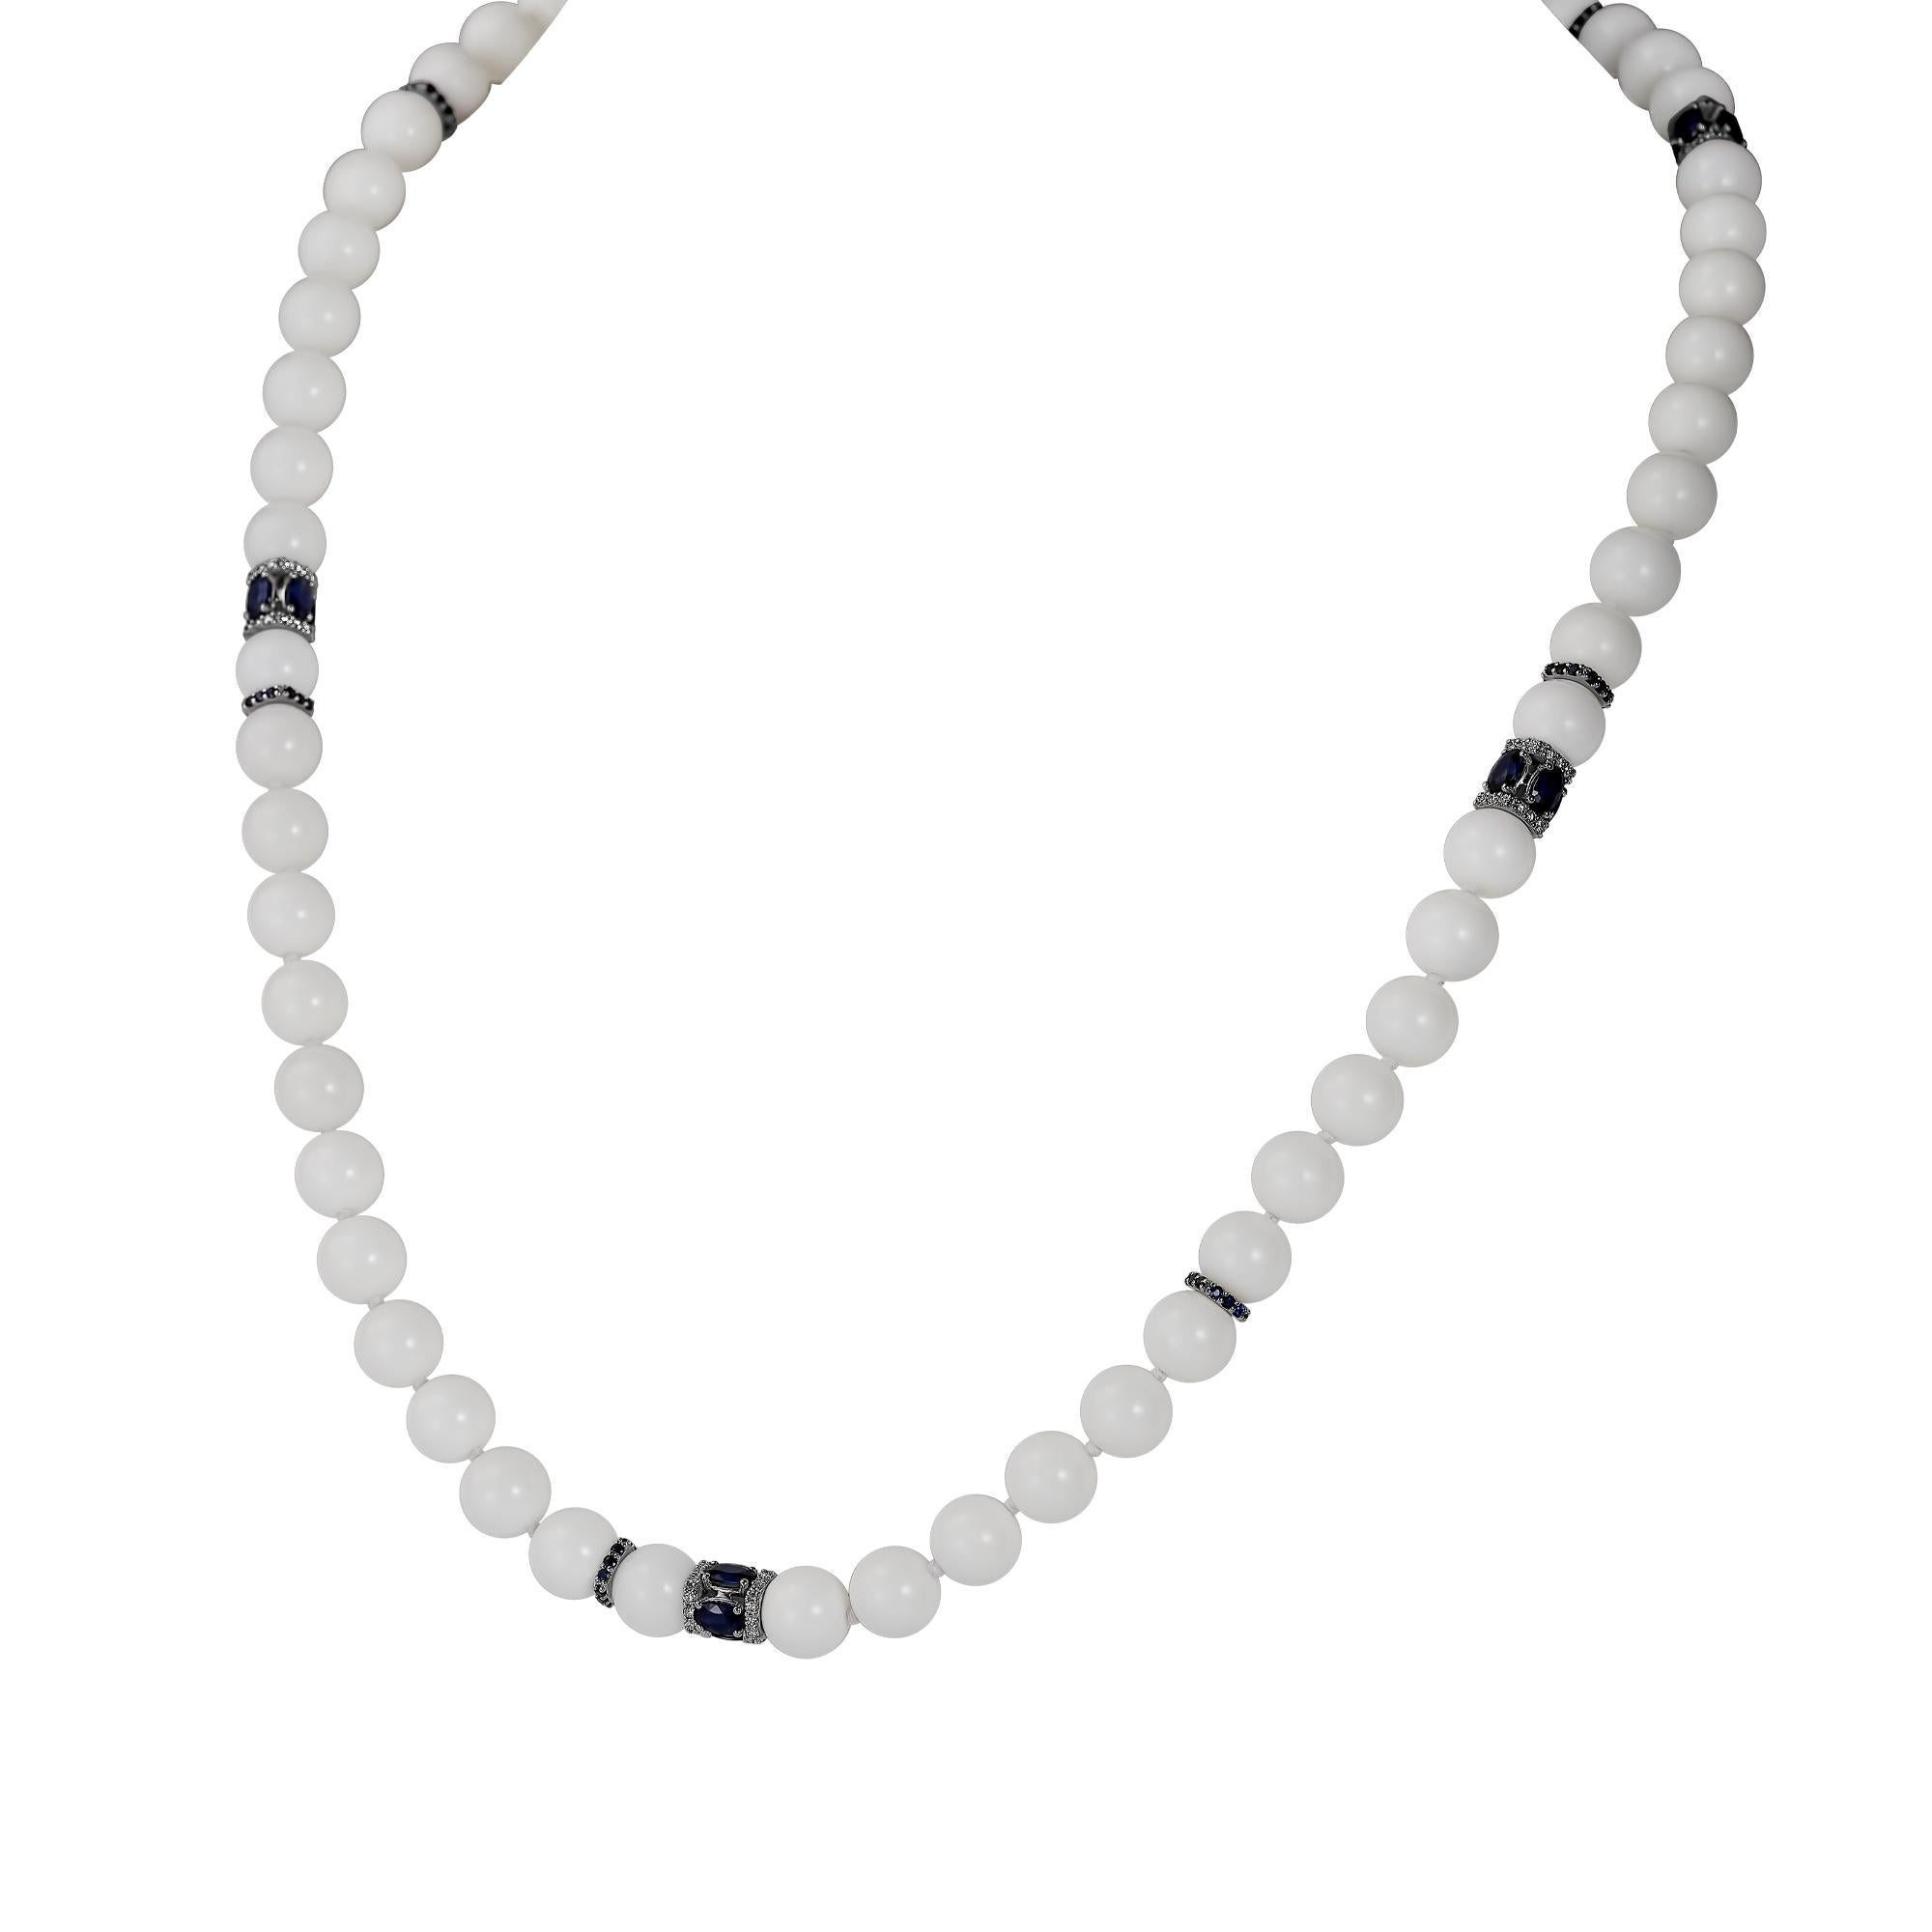 Necklace with white agate beads, 18K white gold, white diamonds (approx. 2.28 carats) and blue sapphires (approx. 15.47 carats)